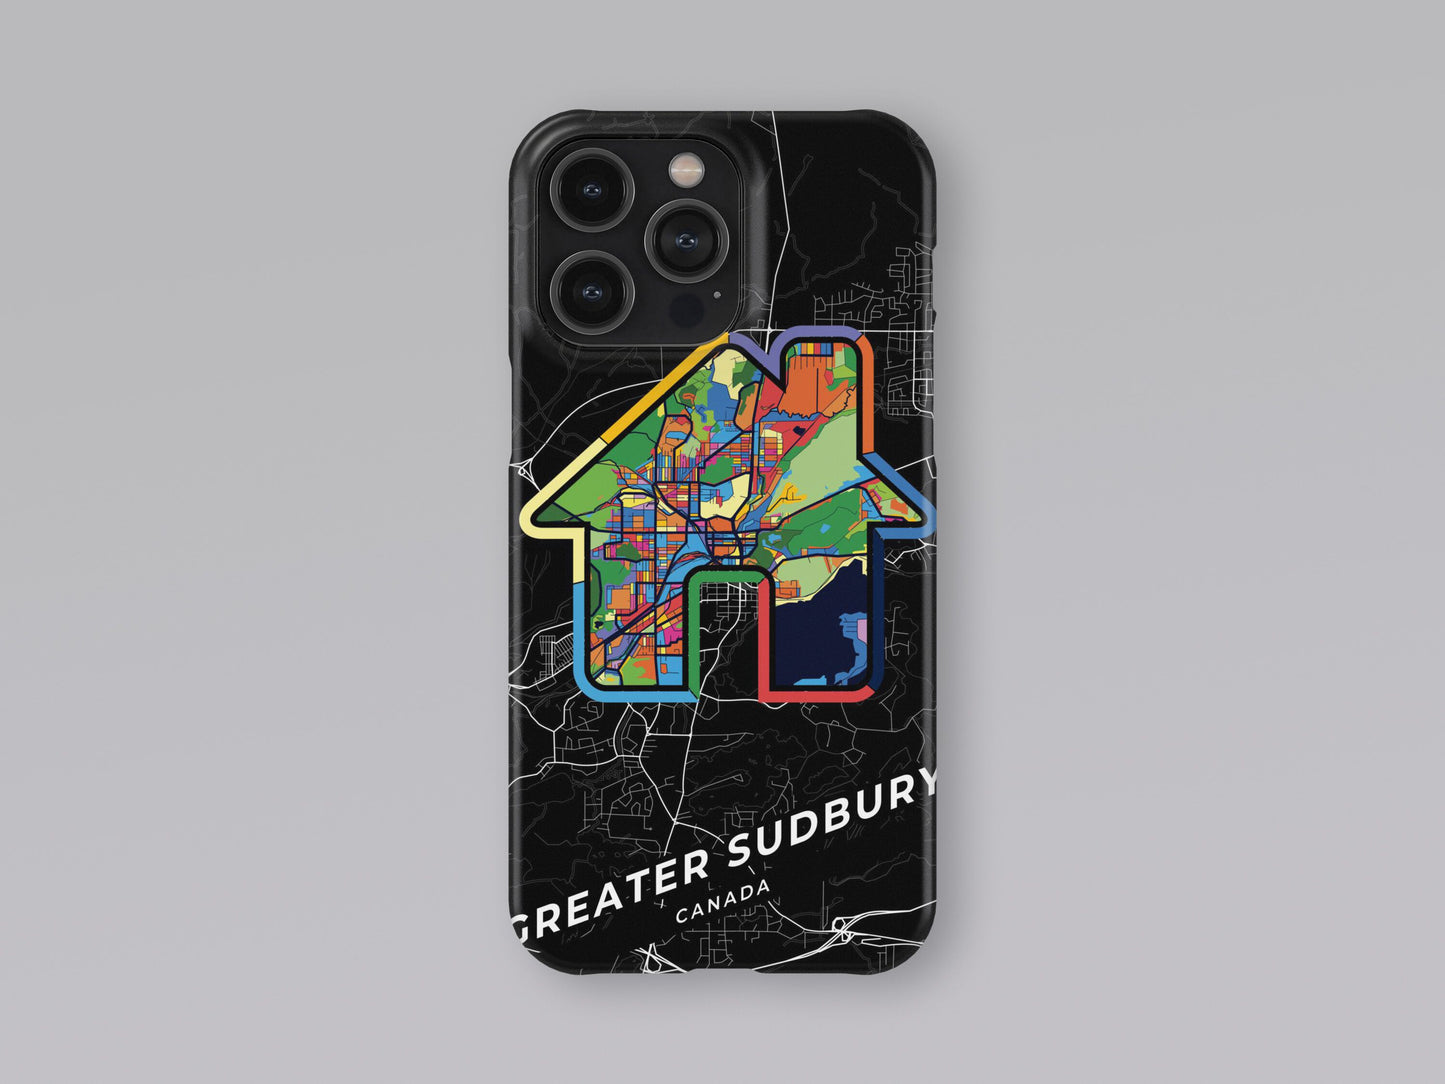 Greater Sudbury Canada slim phone case with colorful icon. Birthday, wedding or housewarming gift. Couple match cases. 3